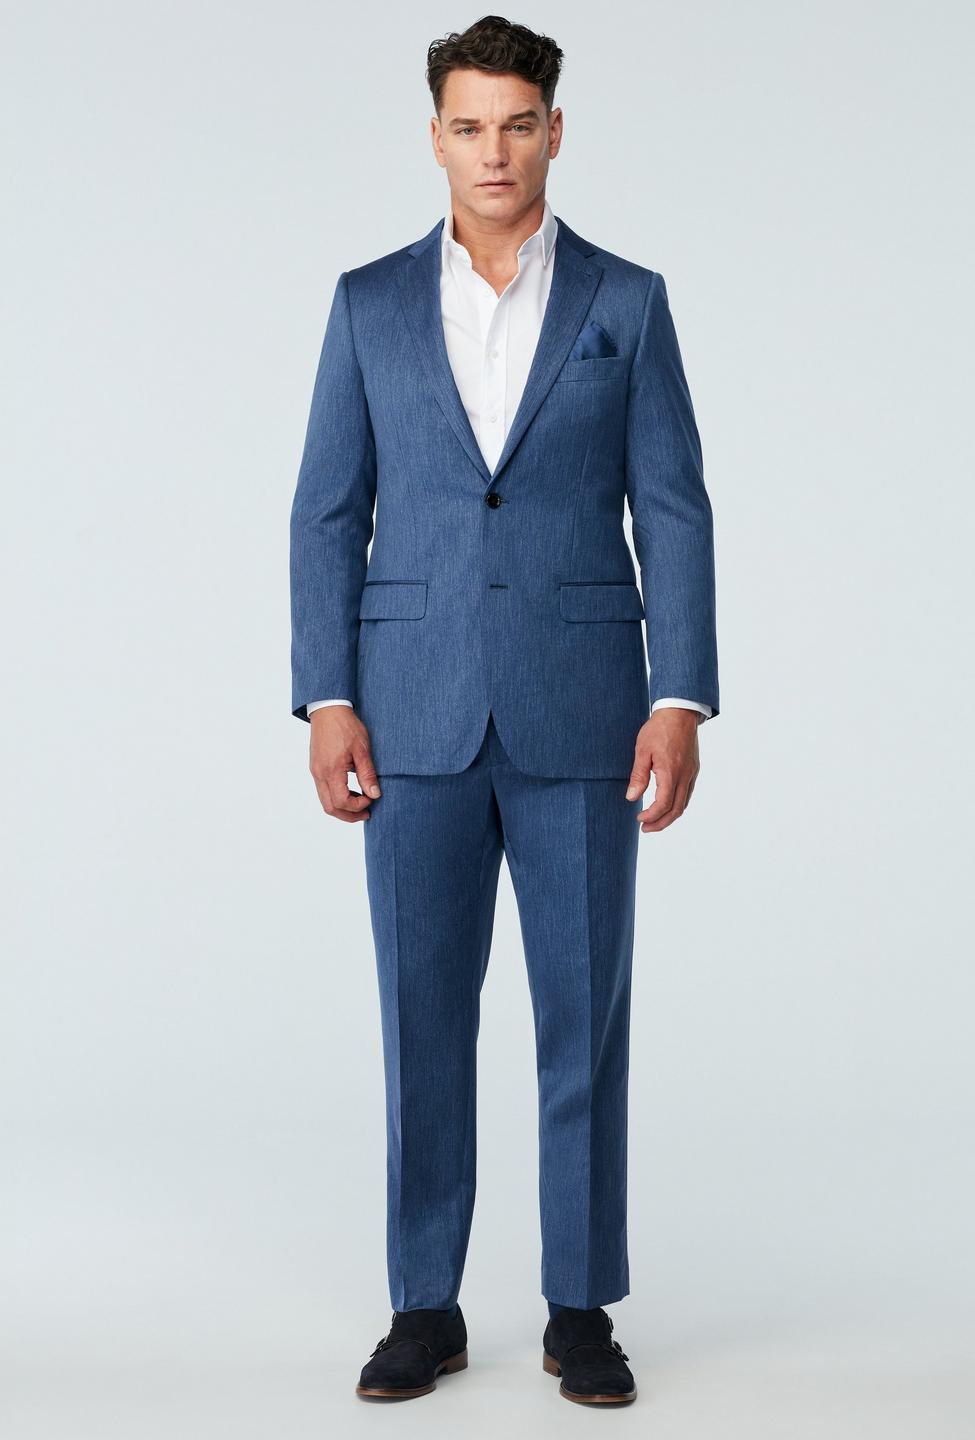 Blue blazer - Solid Design from Indochino Collection